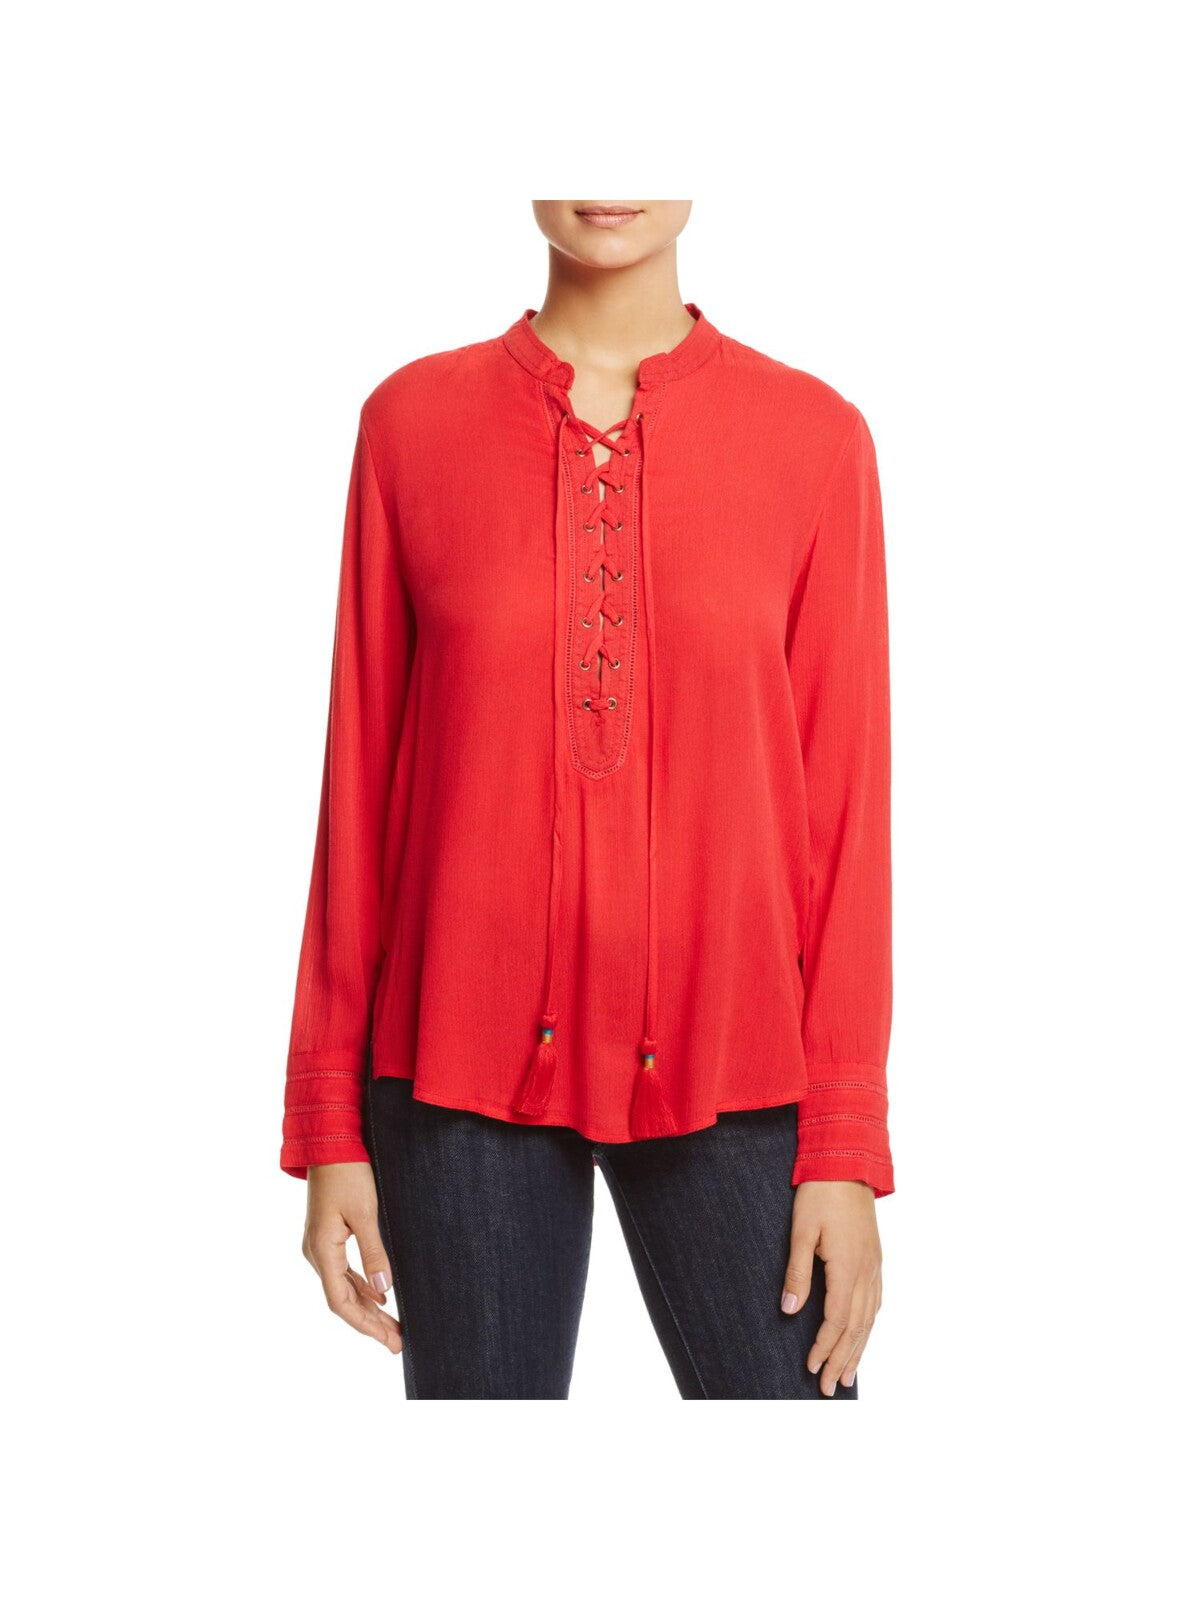 JACHS GIRLFRIEND Womens Red Tie Split Lace Up Neck Cuffed Sleeve Top S